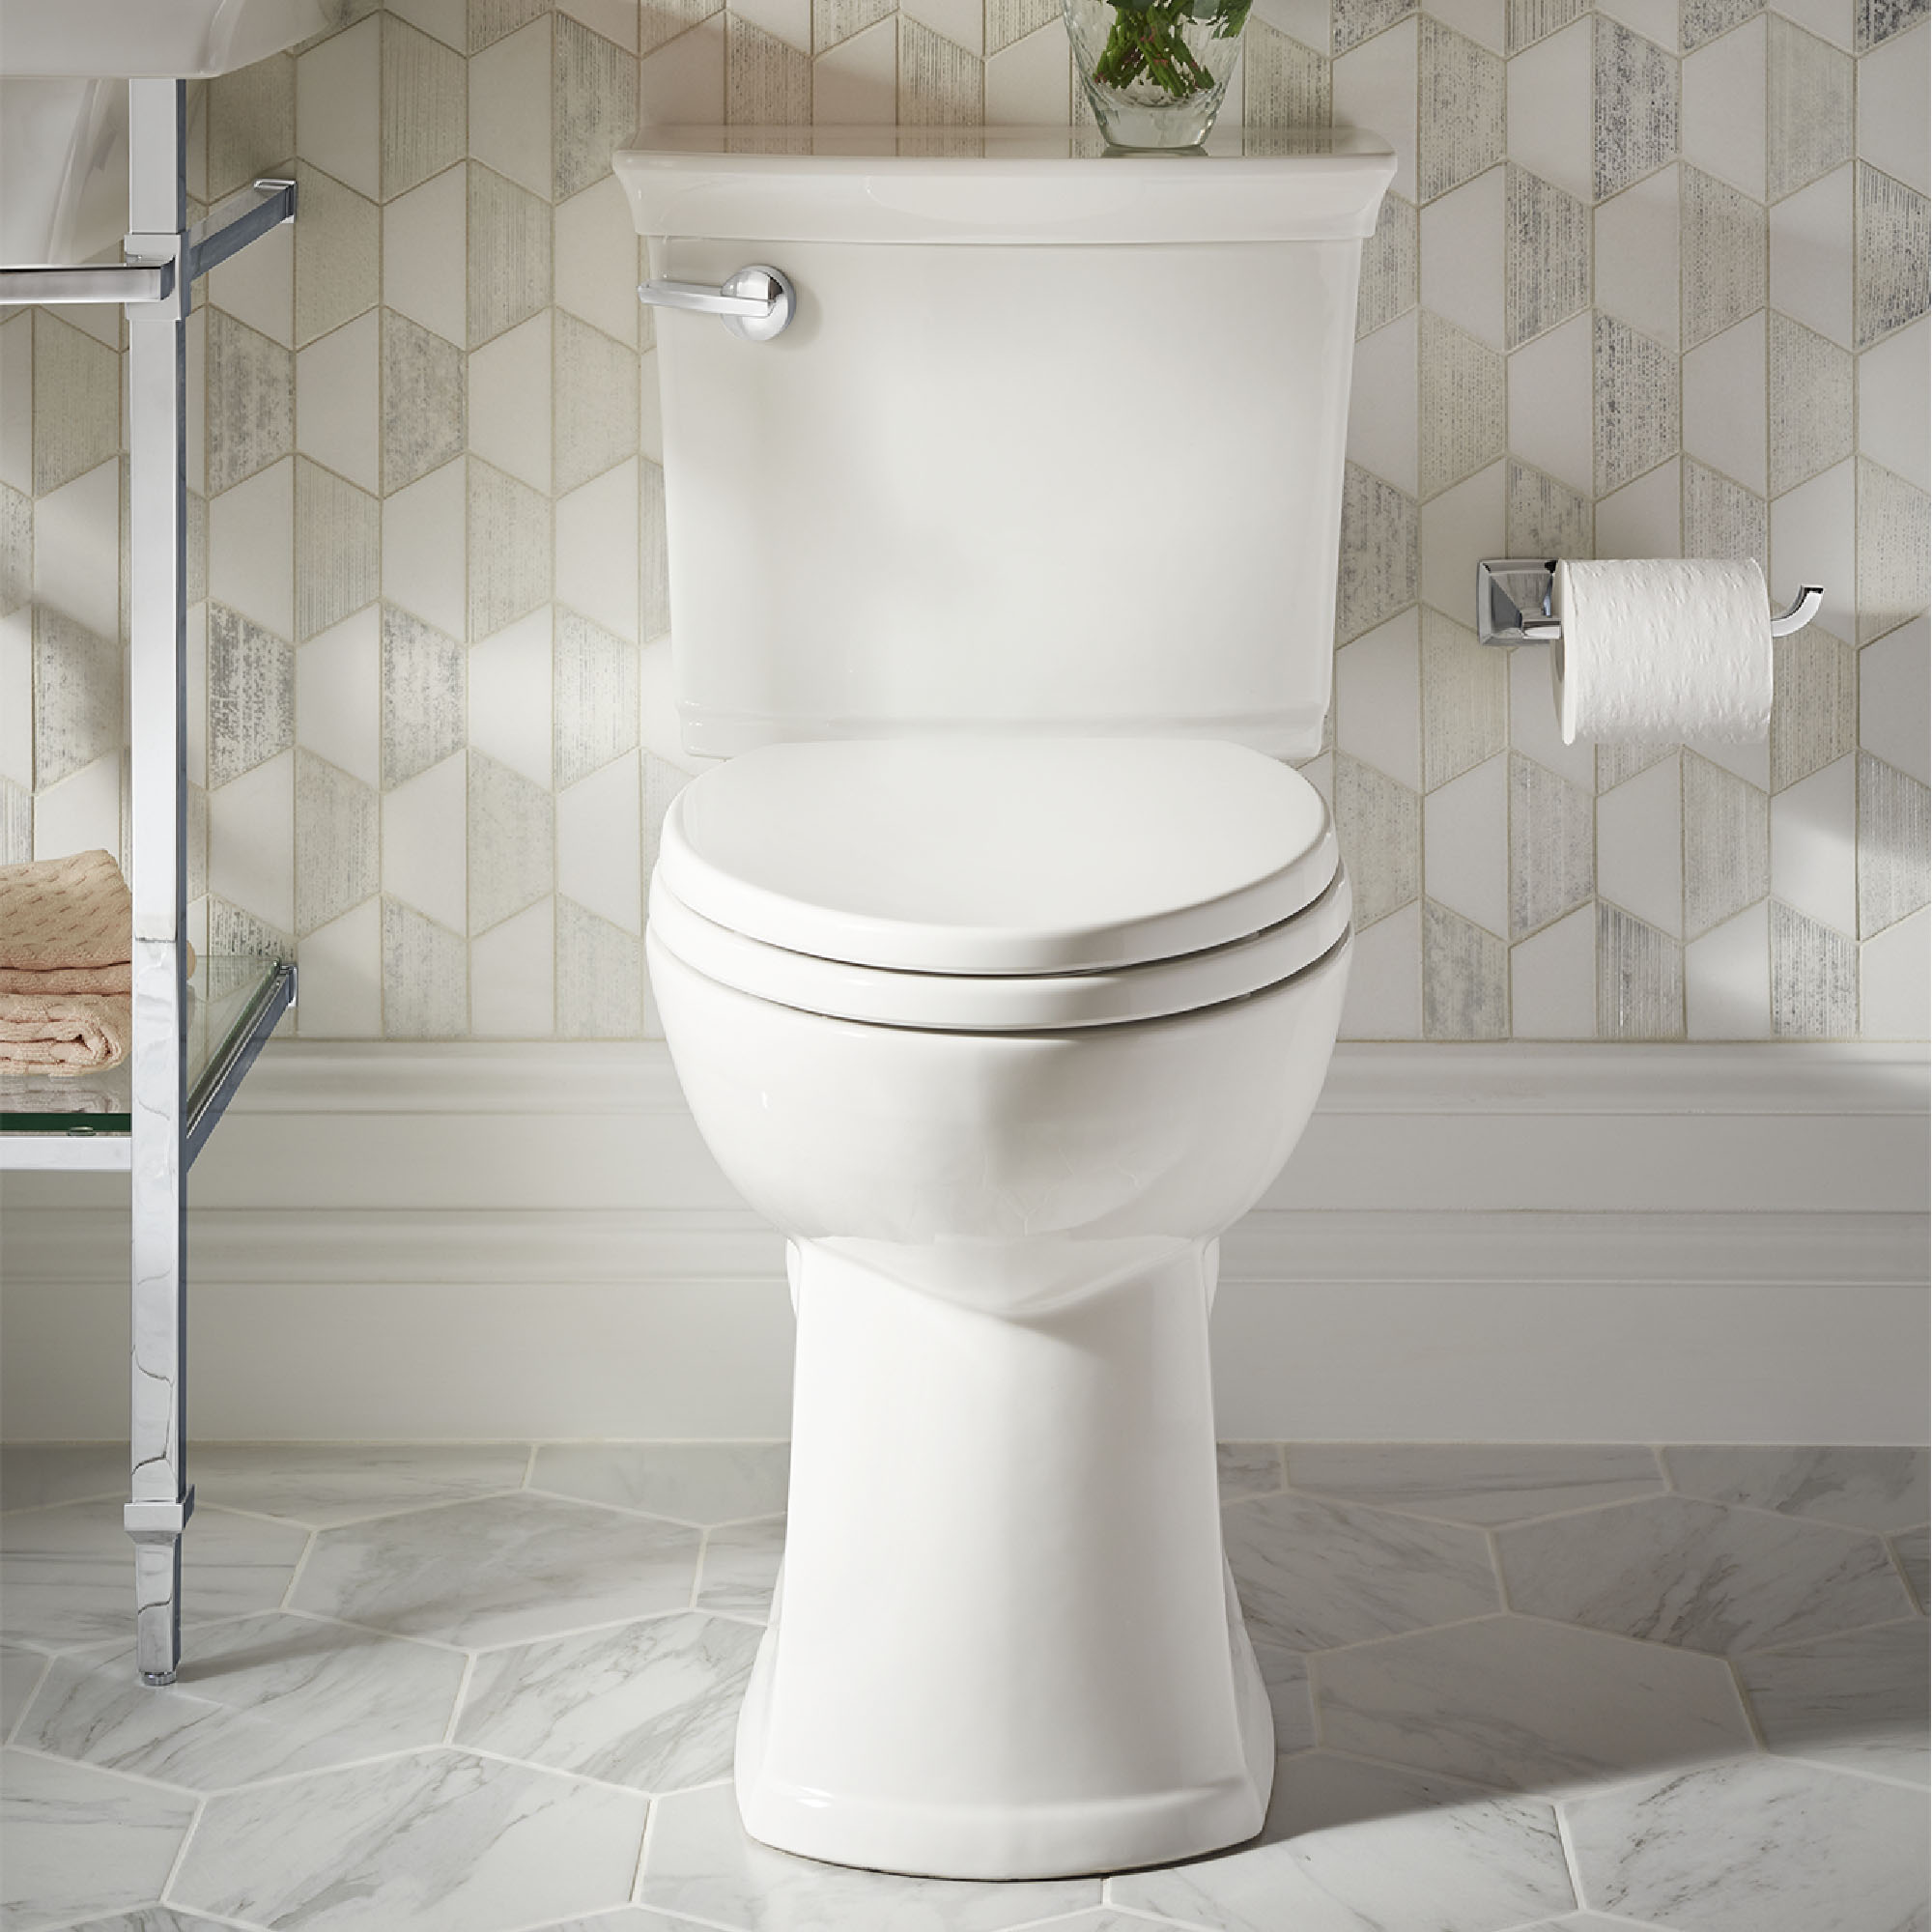 Wyatt® Two-Piece Chair-Height Left-Hand Trip Lever Elongated Toilet with Seat